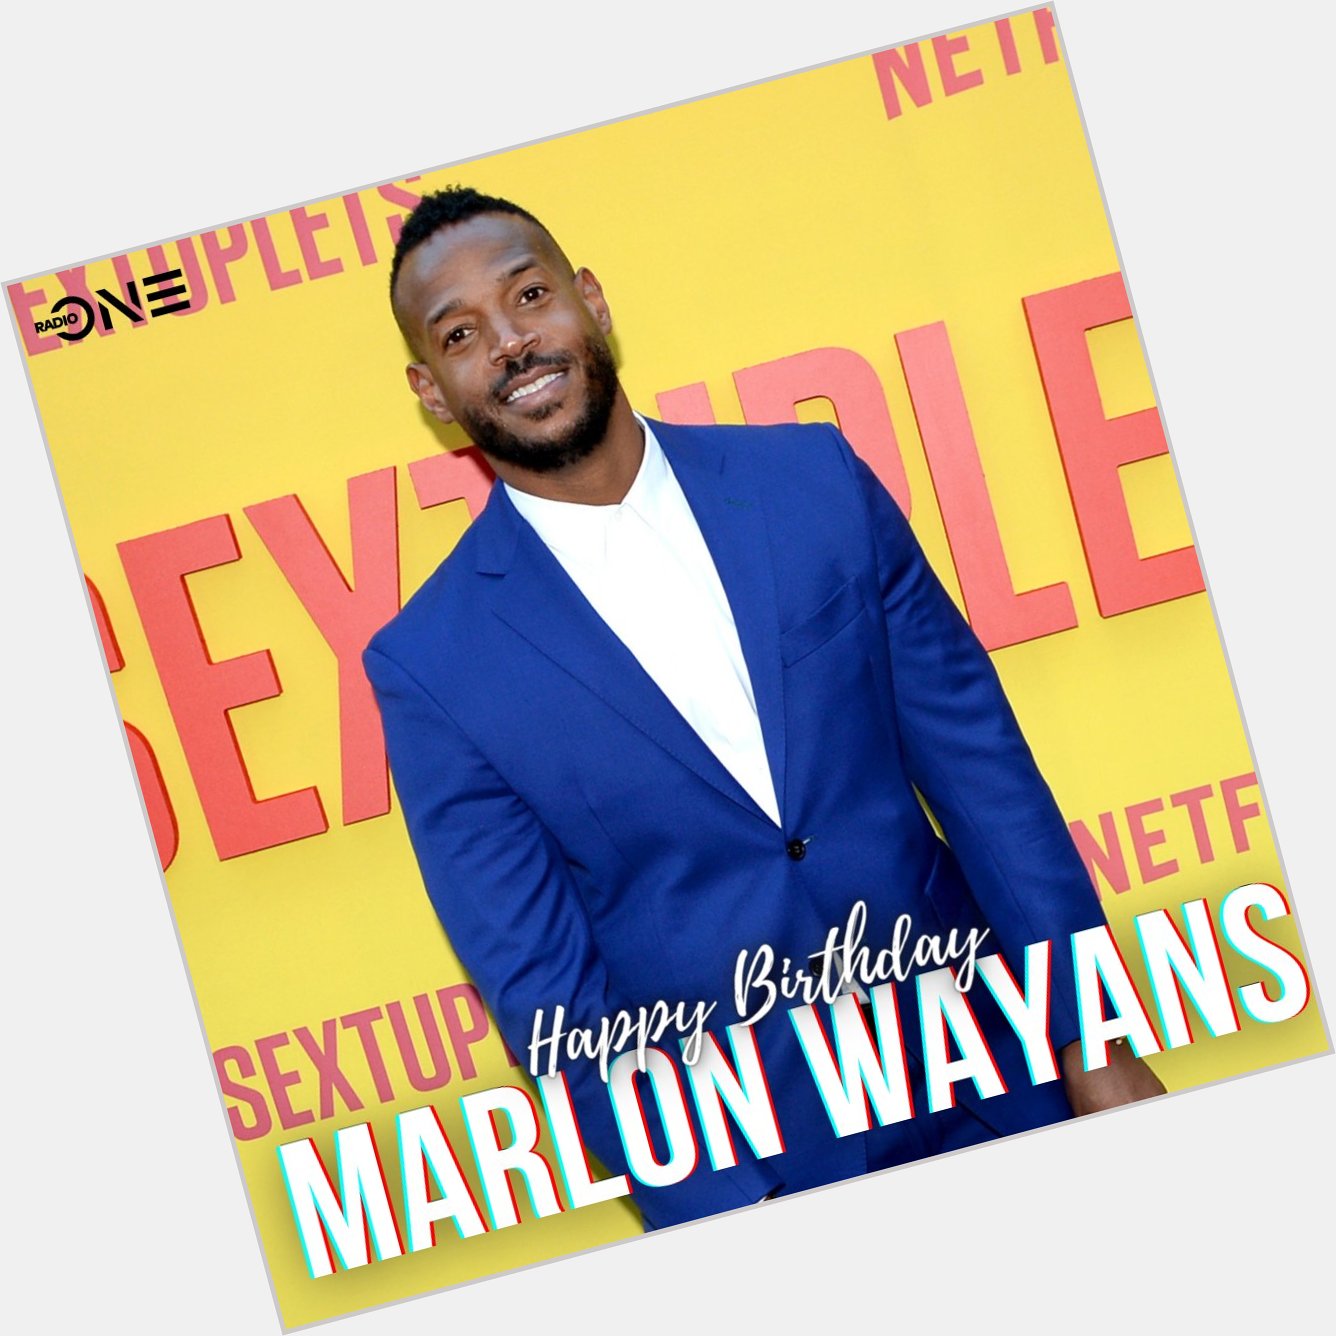 Wishing a Happy Birthday to actor and comedian Marlon Wayans! 